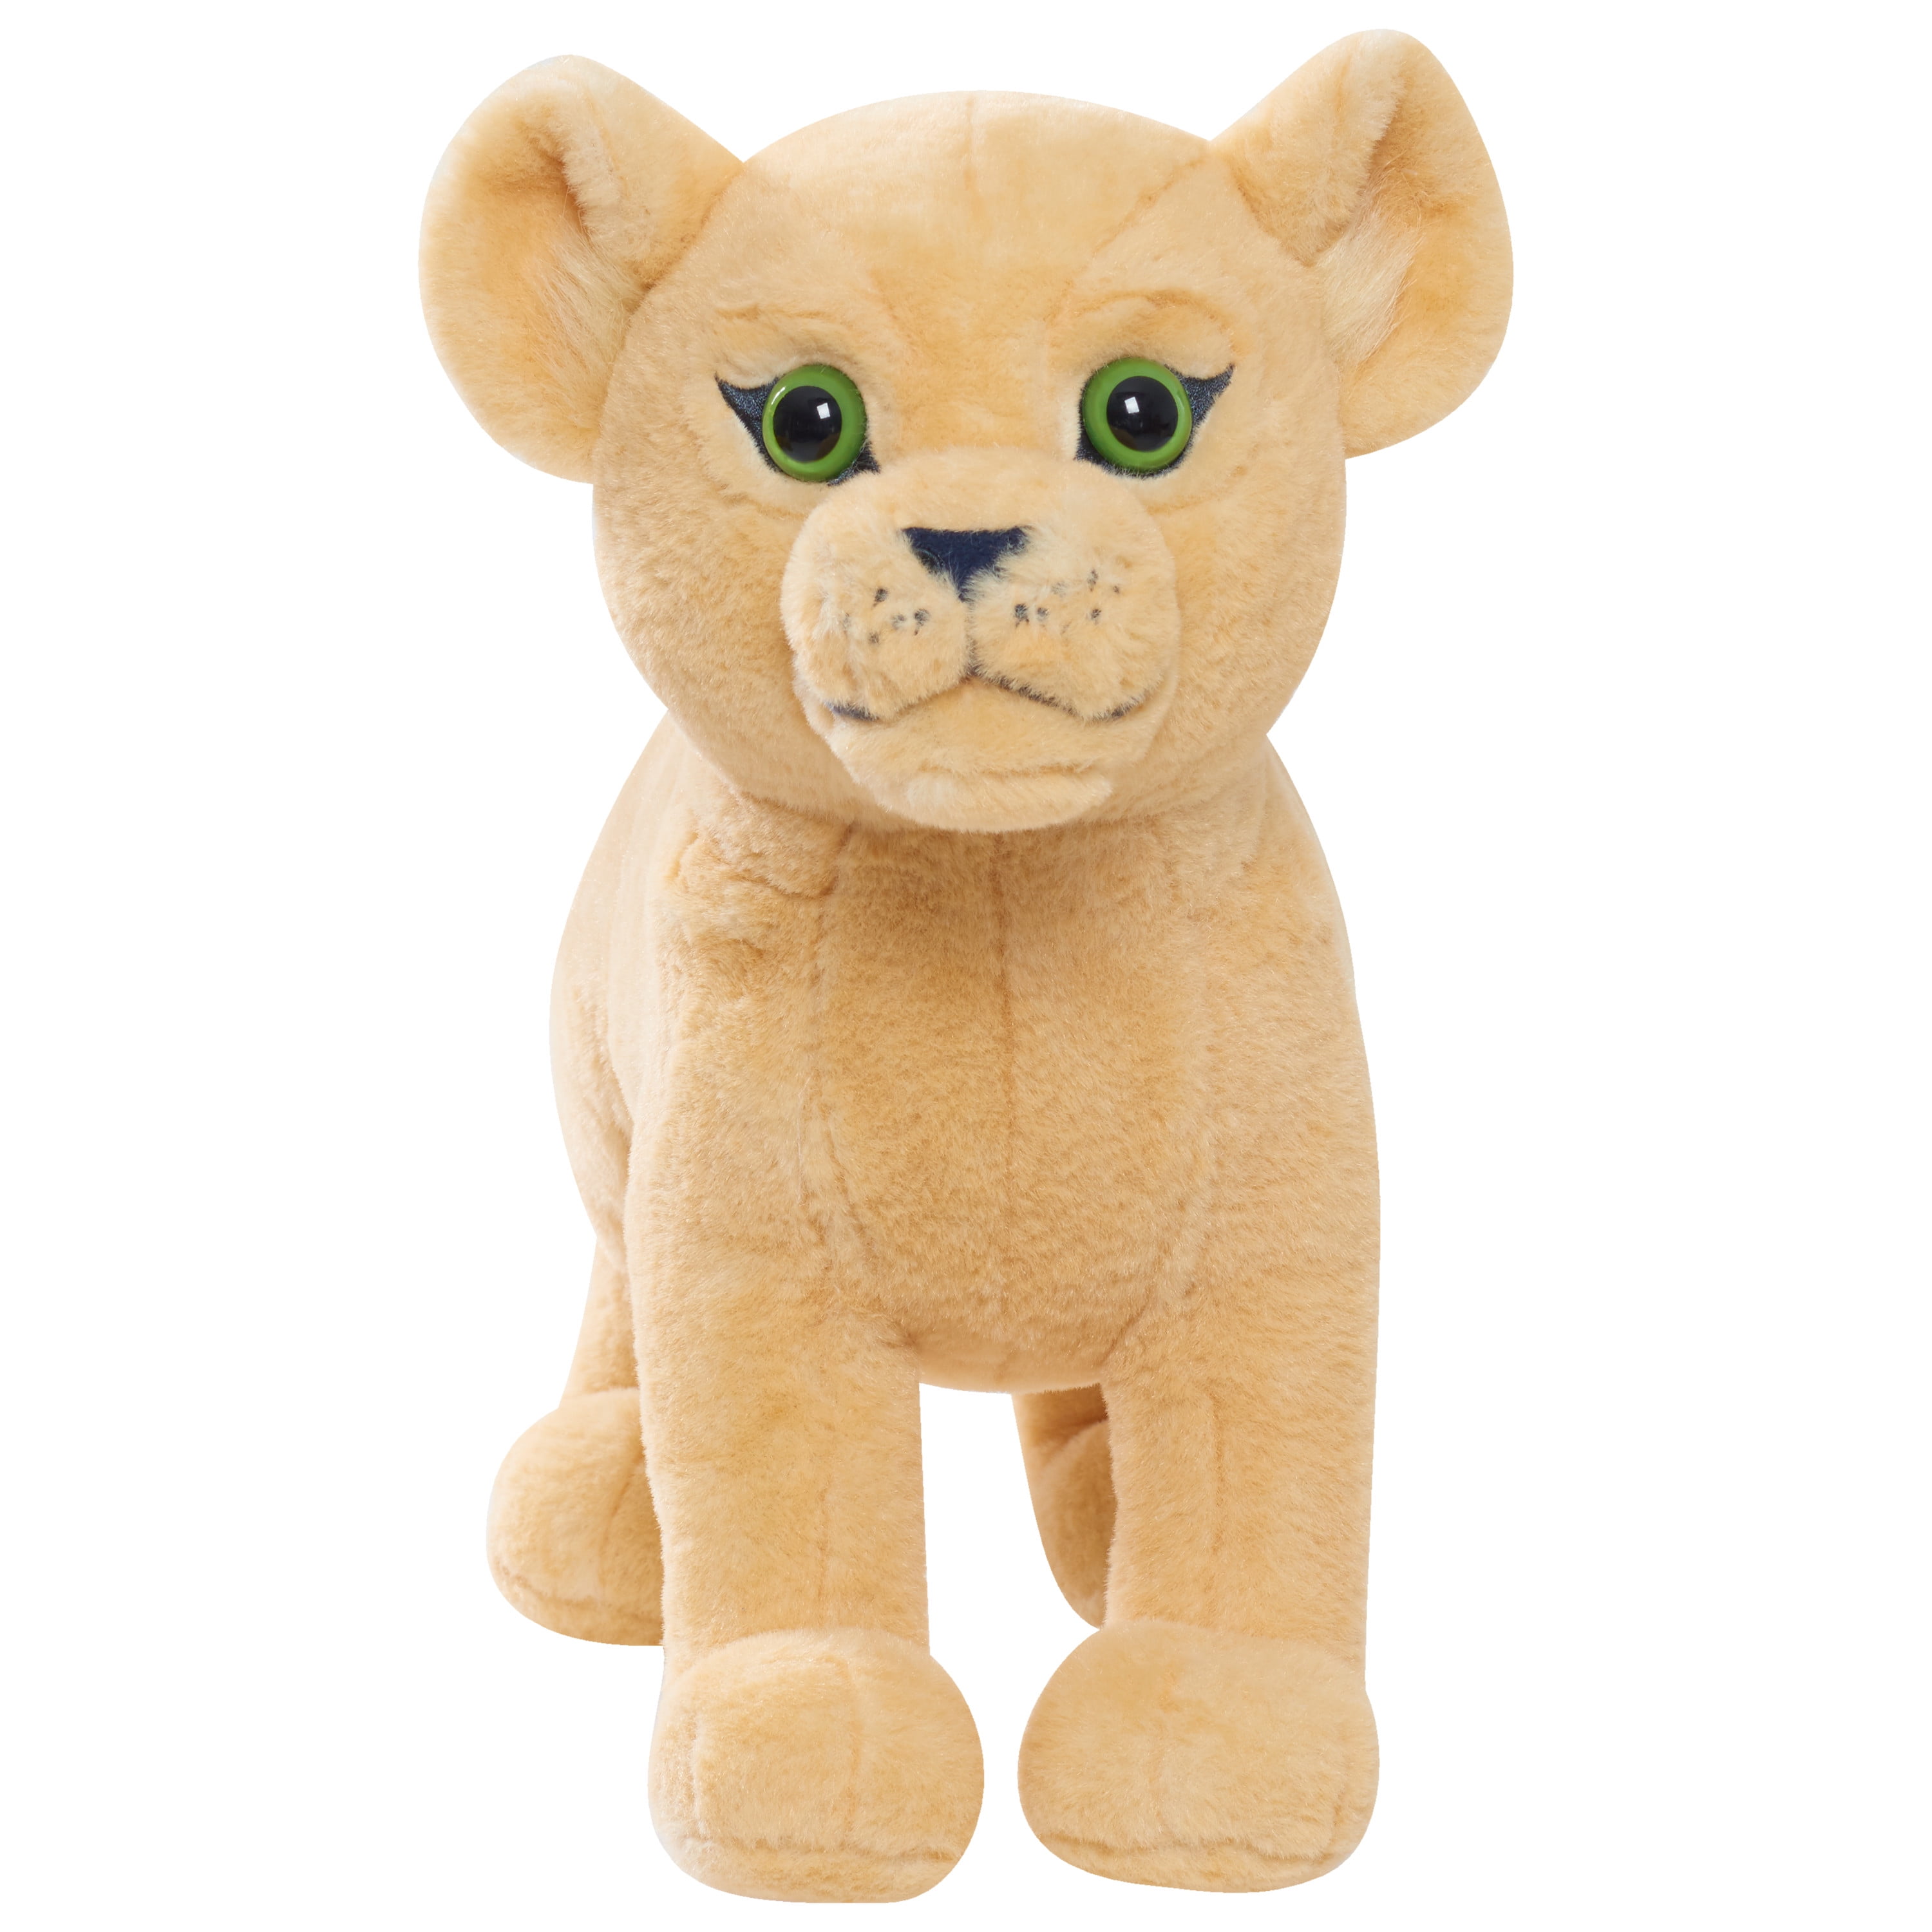 Disney's The Lion King 2019 Nala Plush Toy by Just Play 7" 